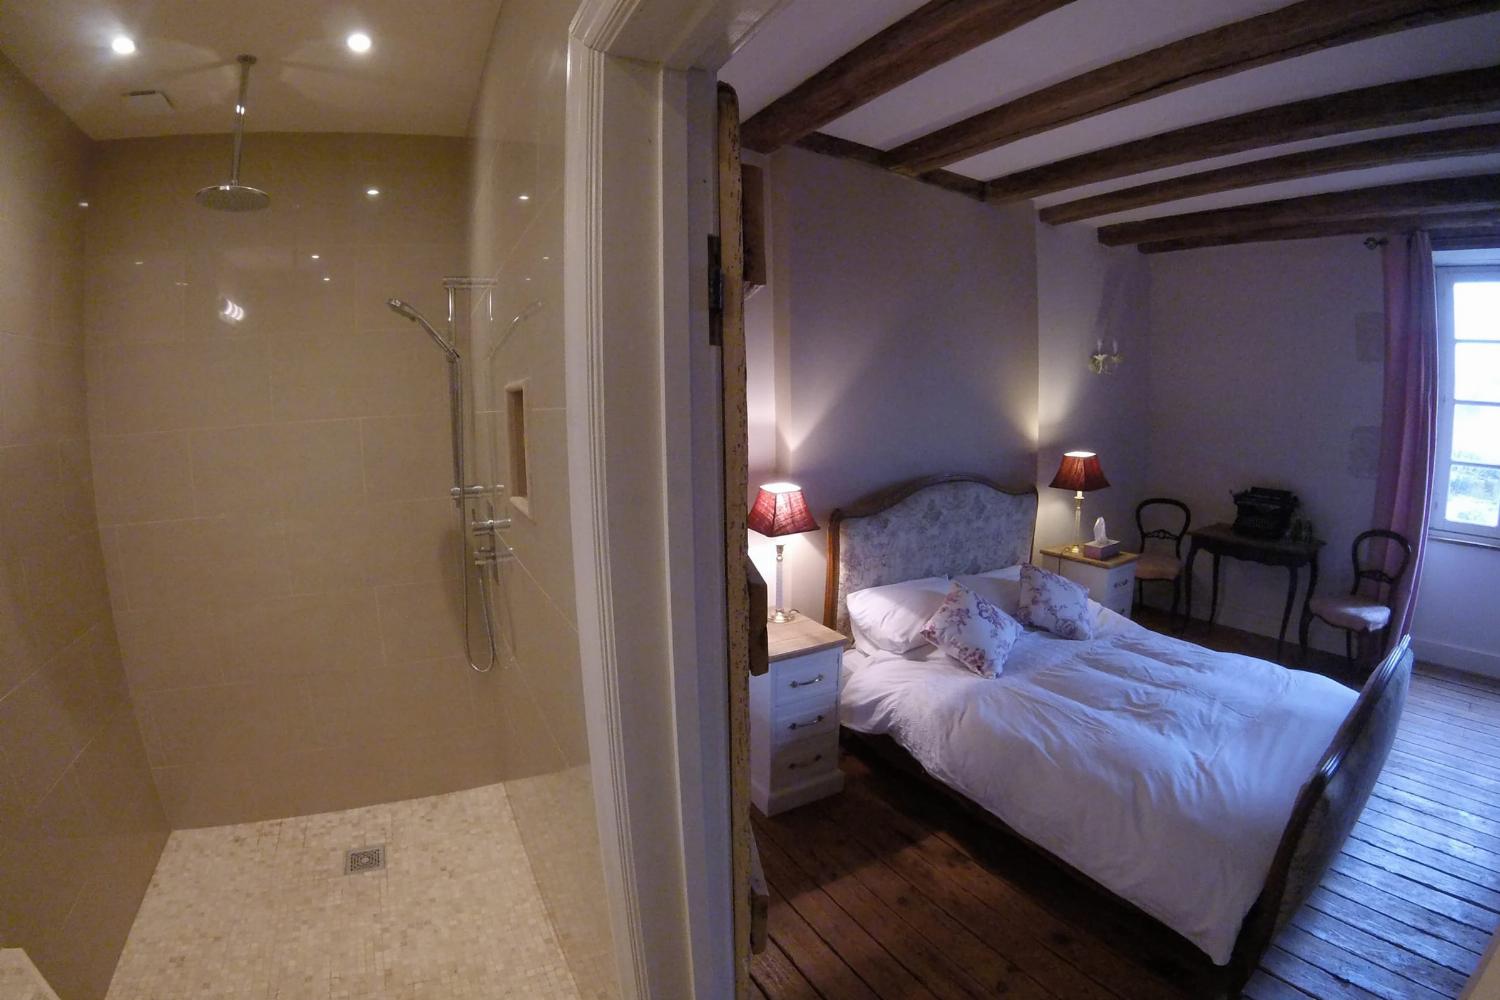 Bedroom | Vacation home in West France